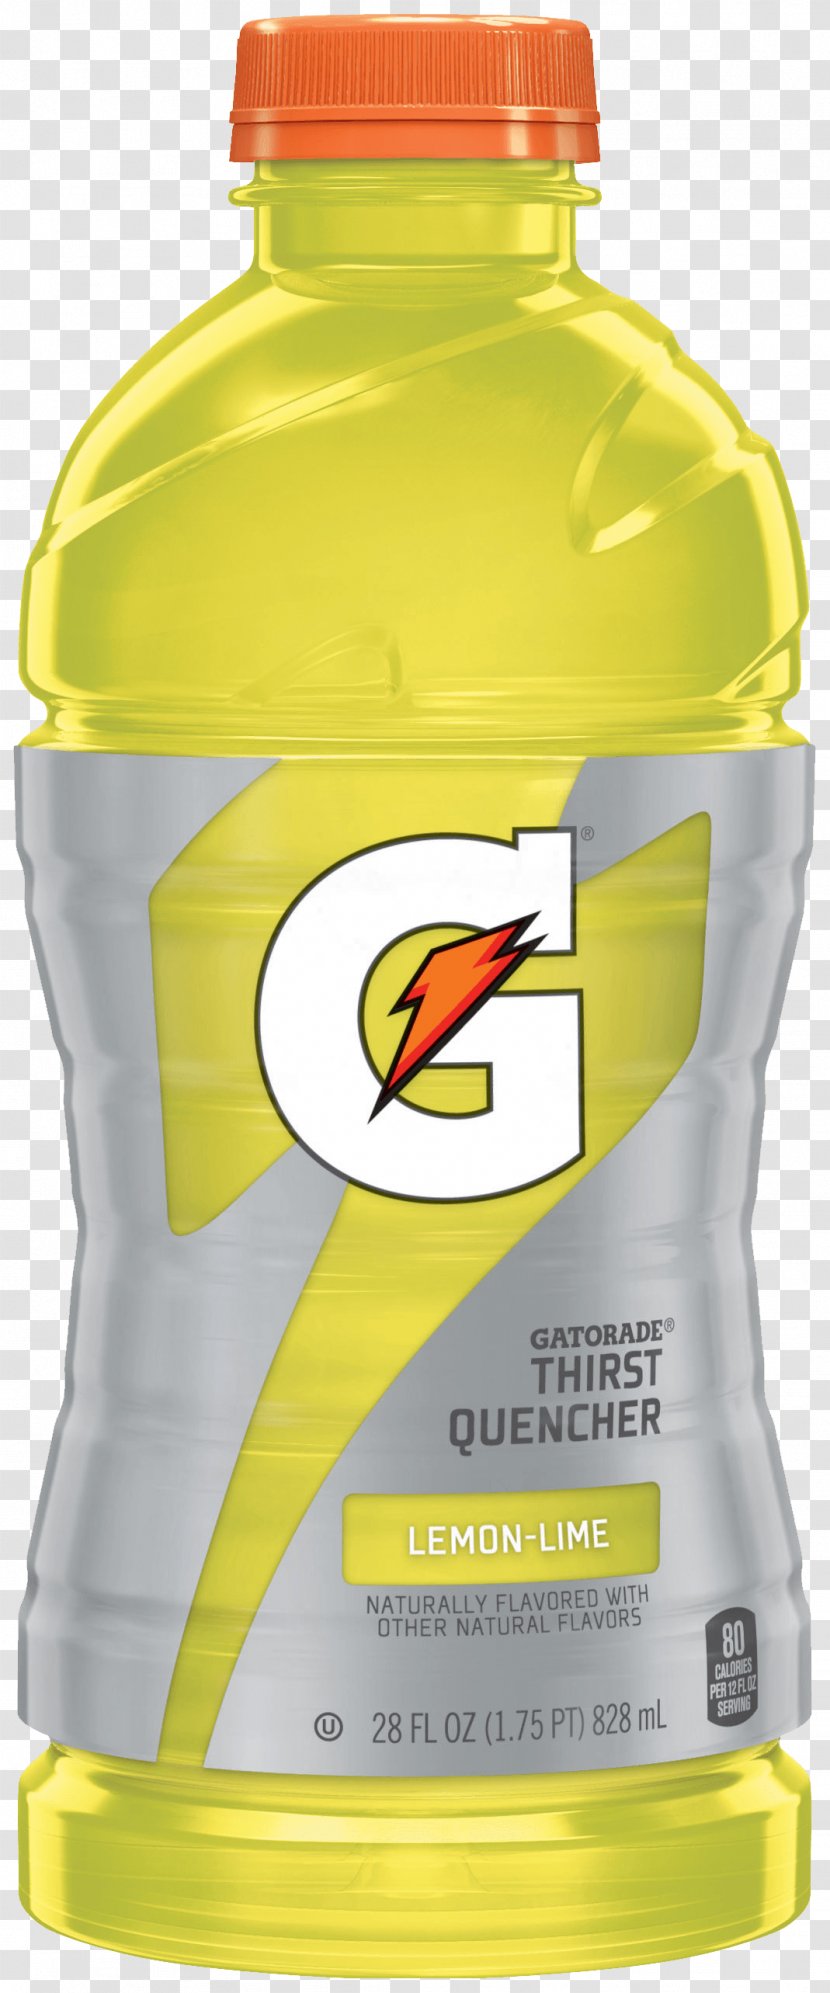 Lemon-lime Drink Sports & Energy Drinks The Gatorade Company Ounce Bottle - Yellow - Drifting Transparent PNG